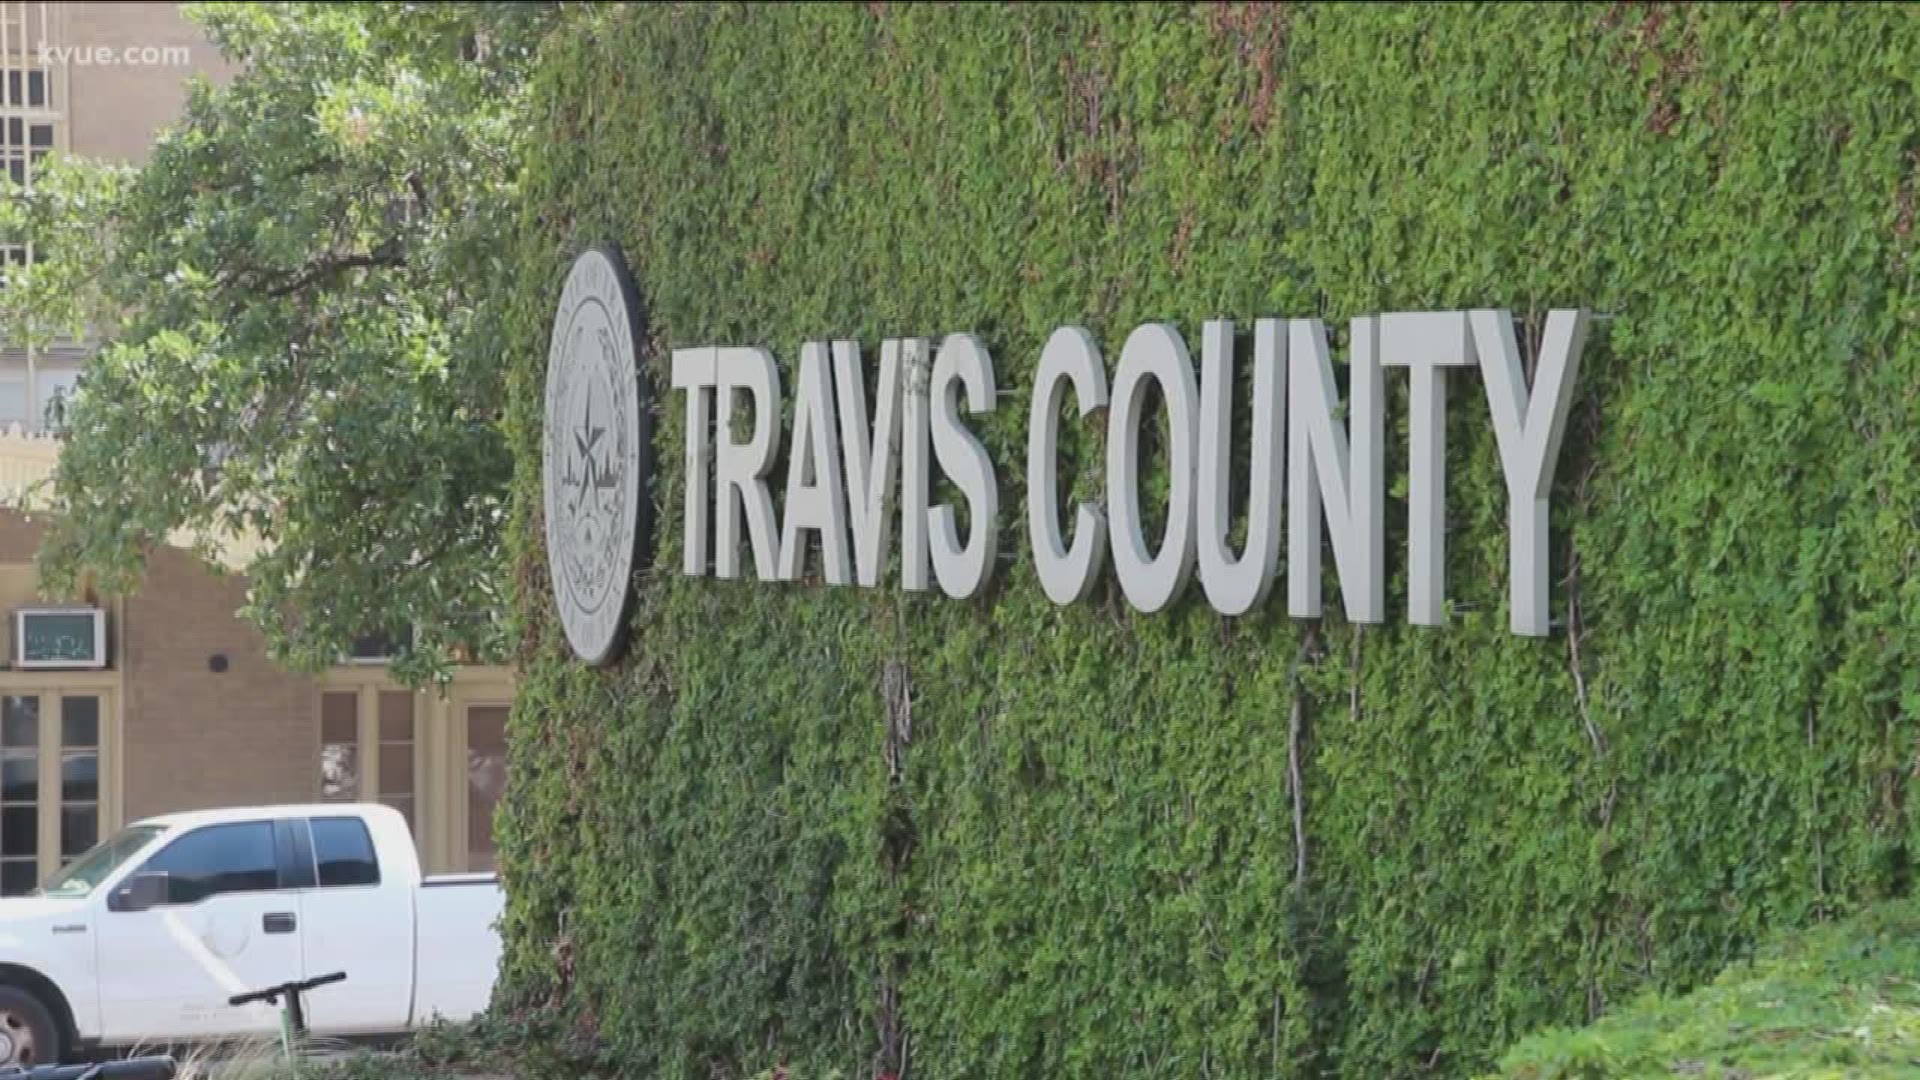 The county has been overpaying workers since January, and it wants them to give back up to $2,000.